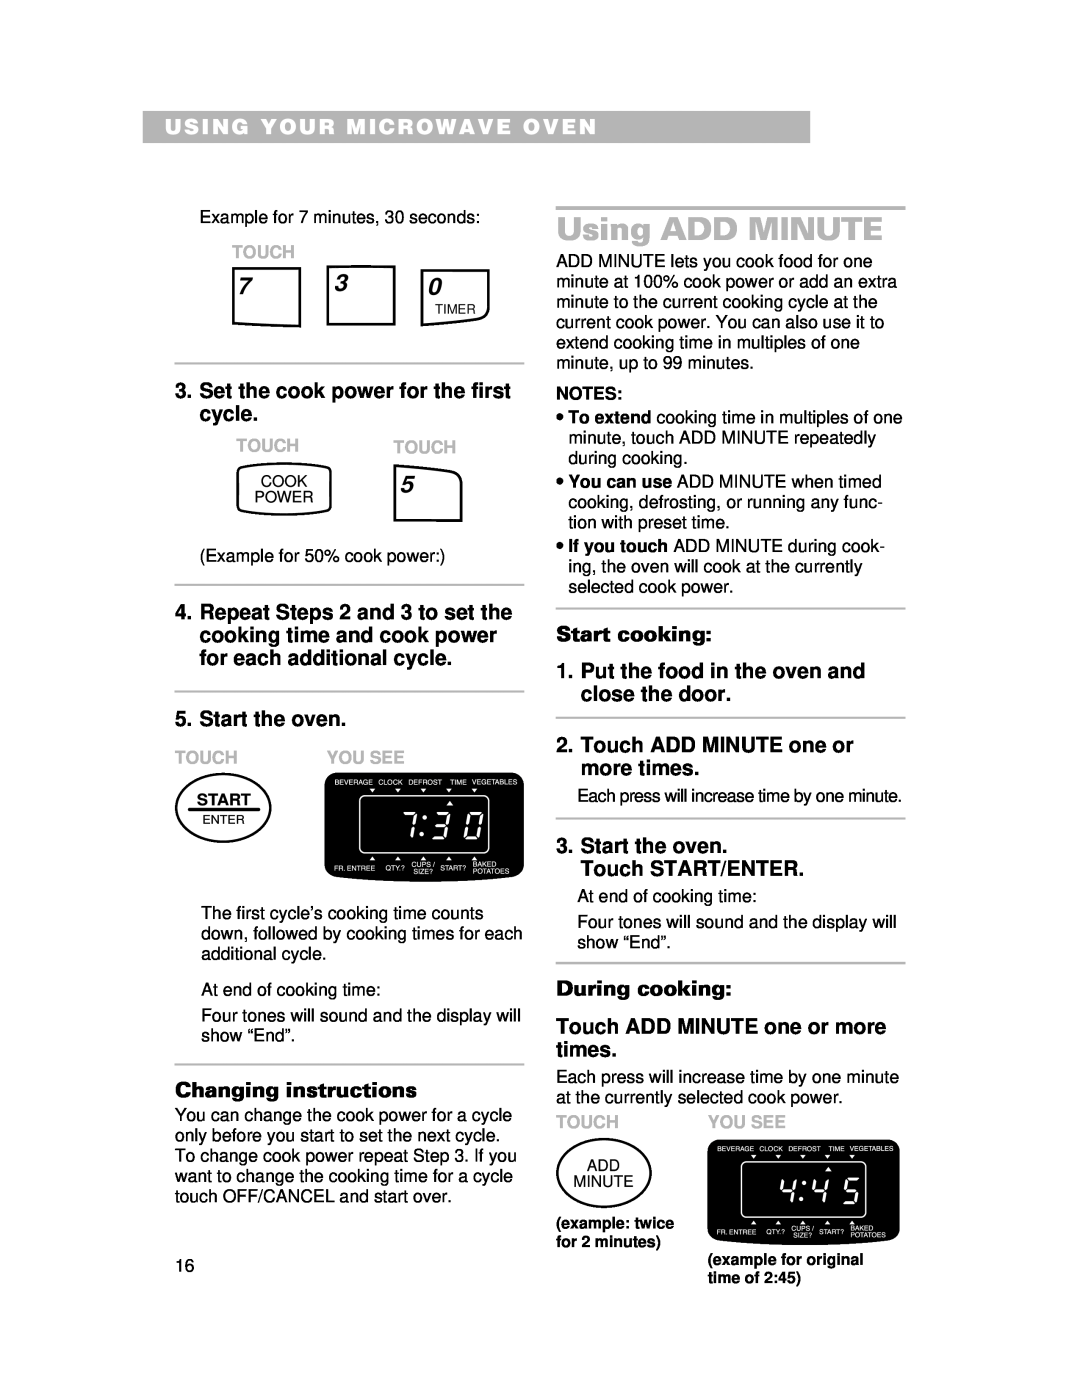 Whirlpool CMT061SG Using ADD MINUTE, Set the cook power for the first cycle, Start the oven, Changing instructions, Touch 